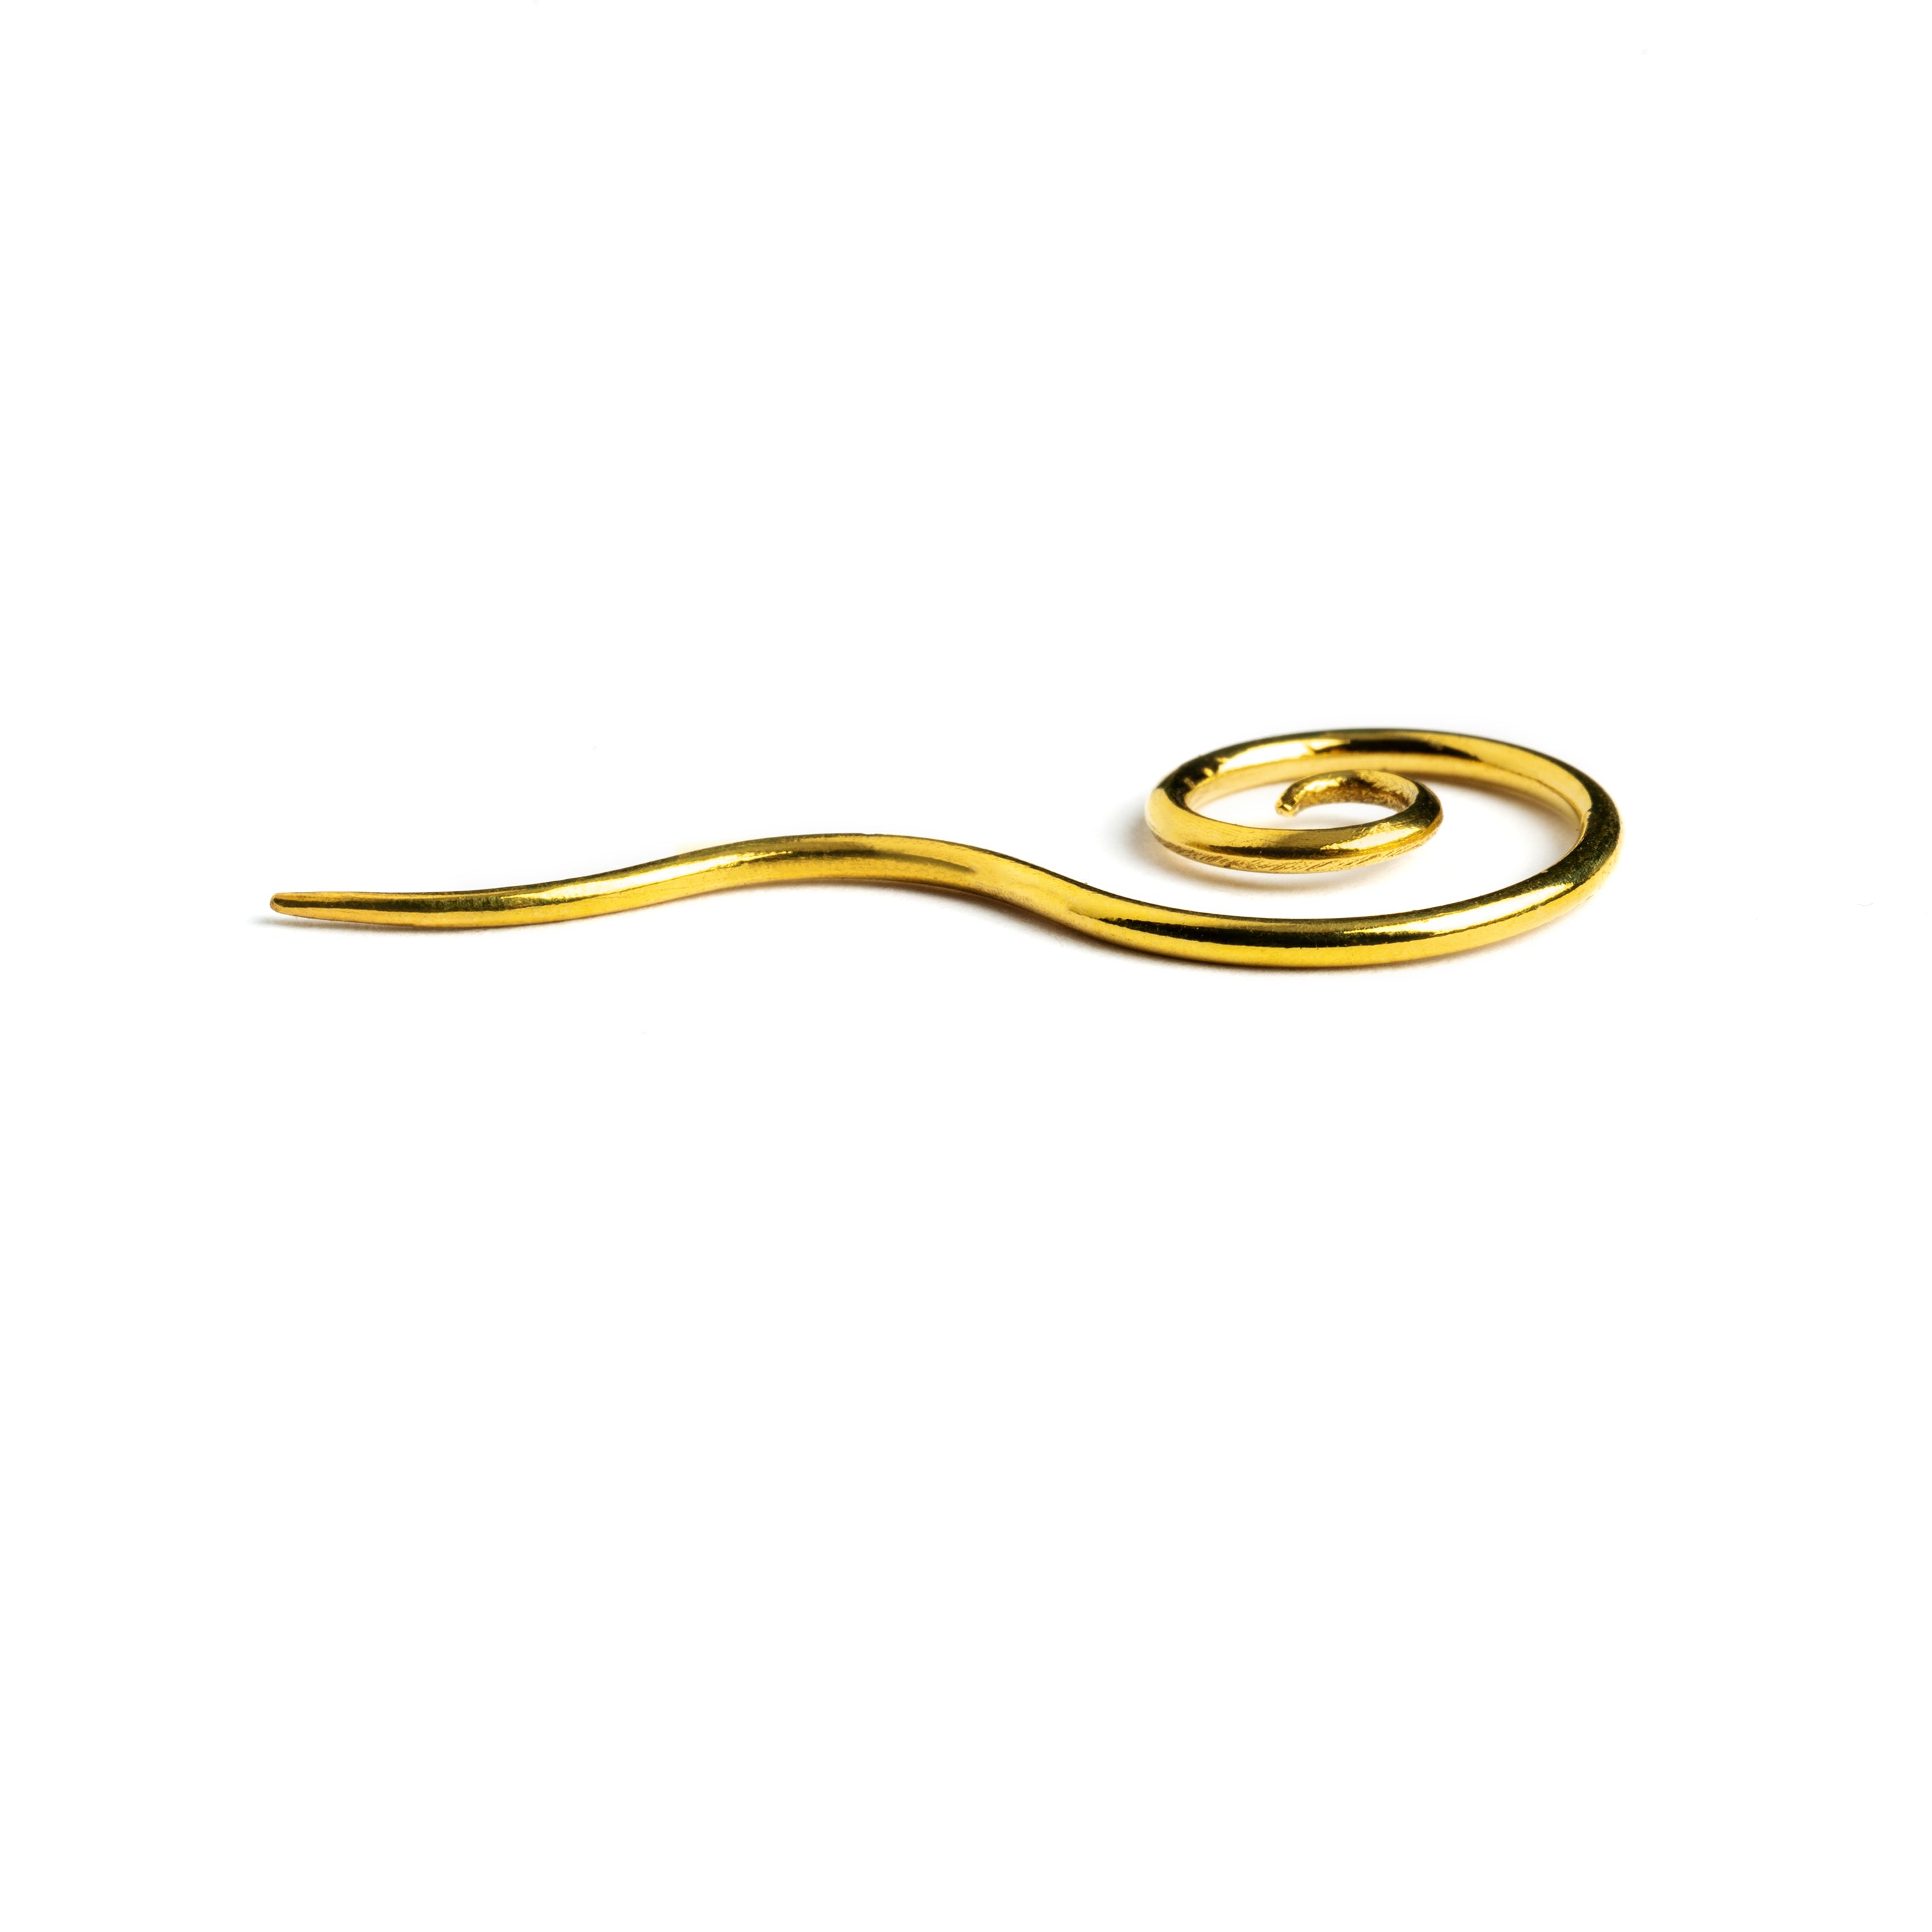 single golden brass wire long tailed spiral hook earring back view